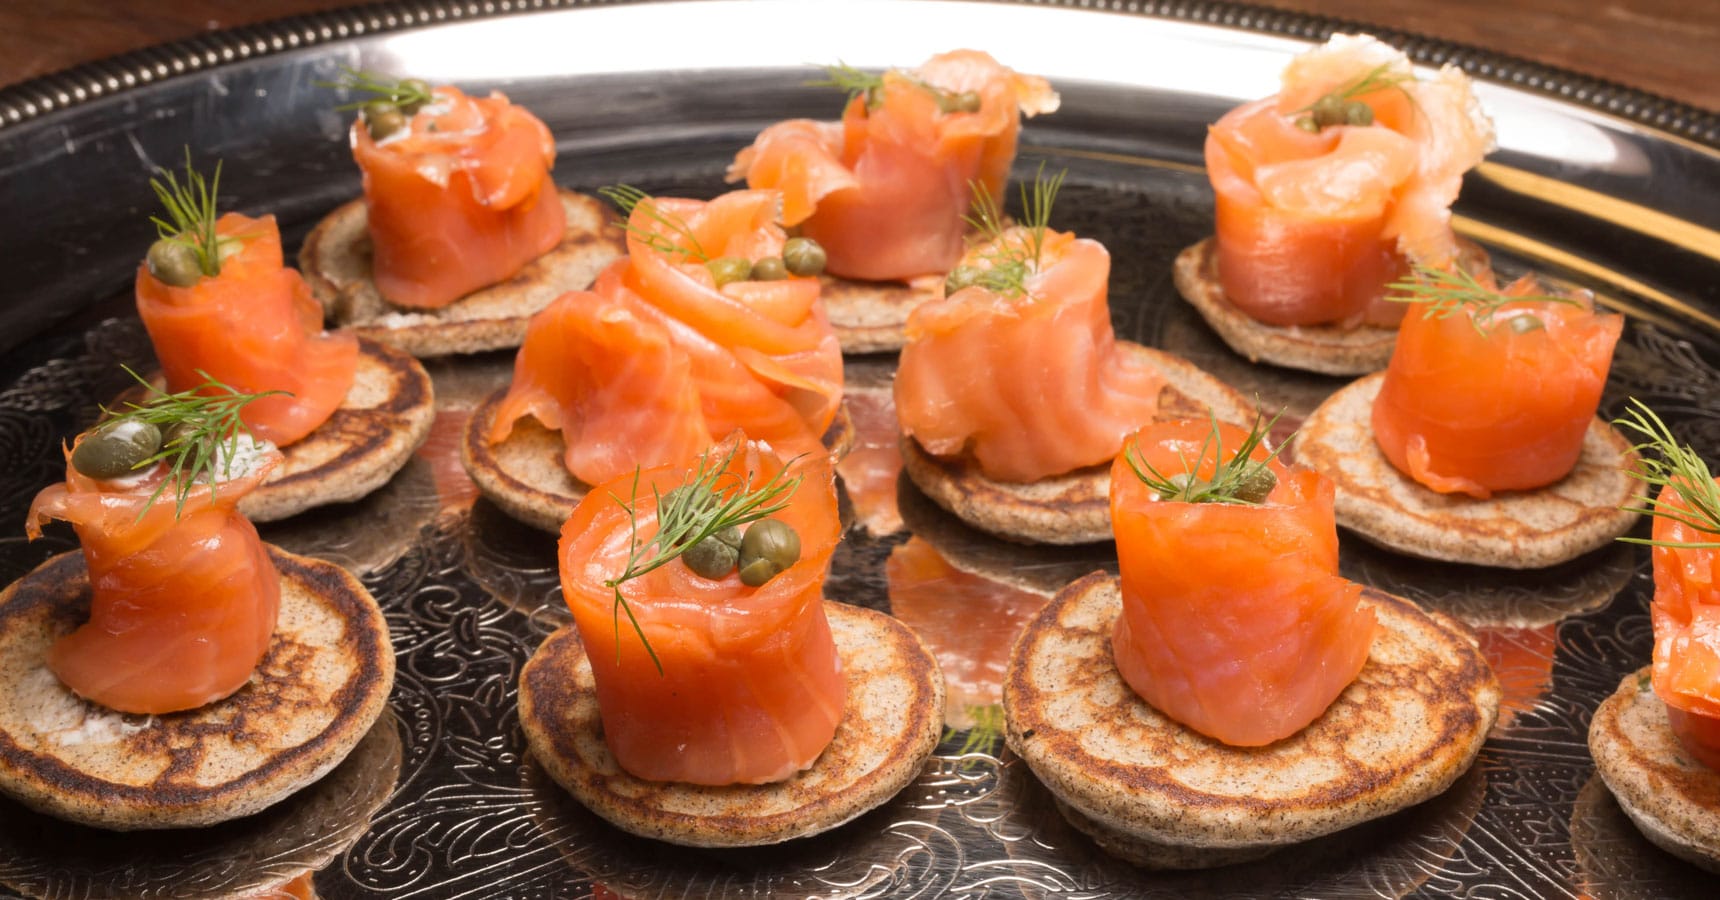 Blini: Russ and Daughters Smoked Salmon, Dill Creme Fraiche, Capers by Crave Catering